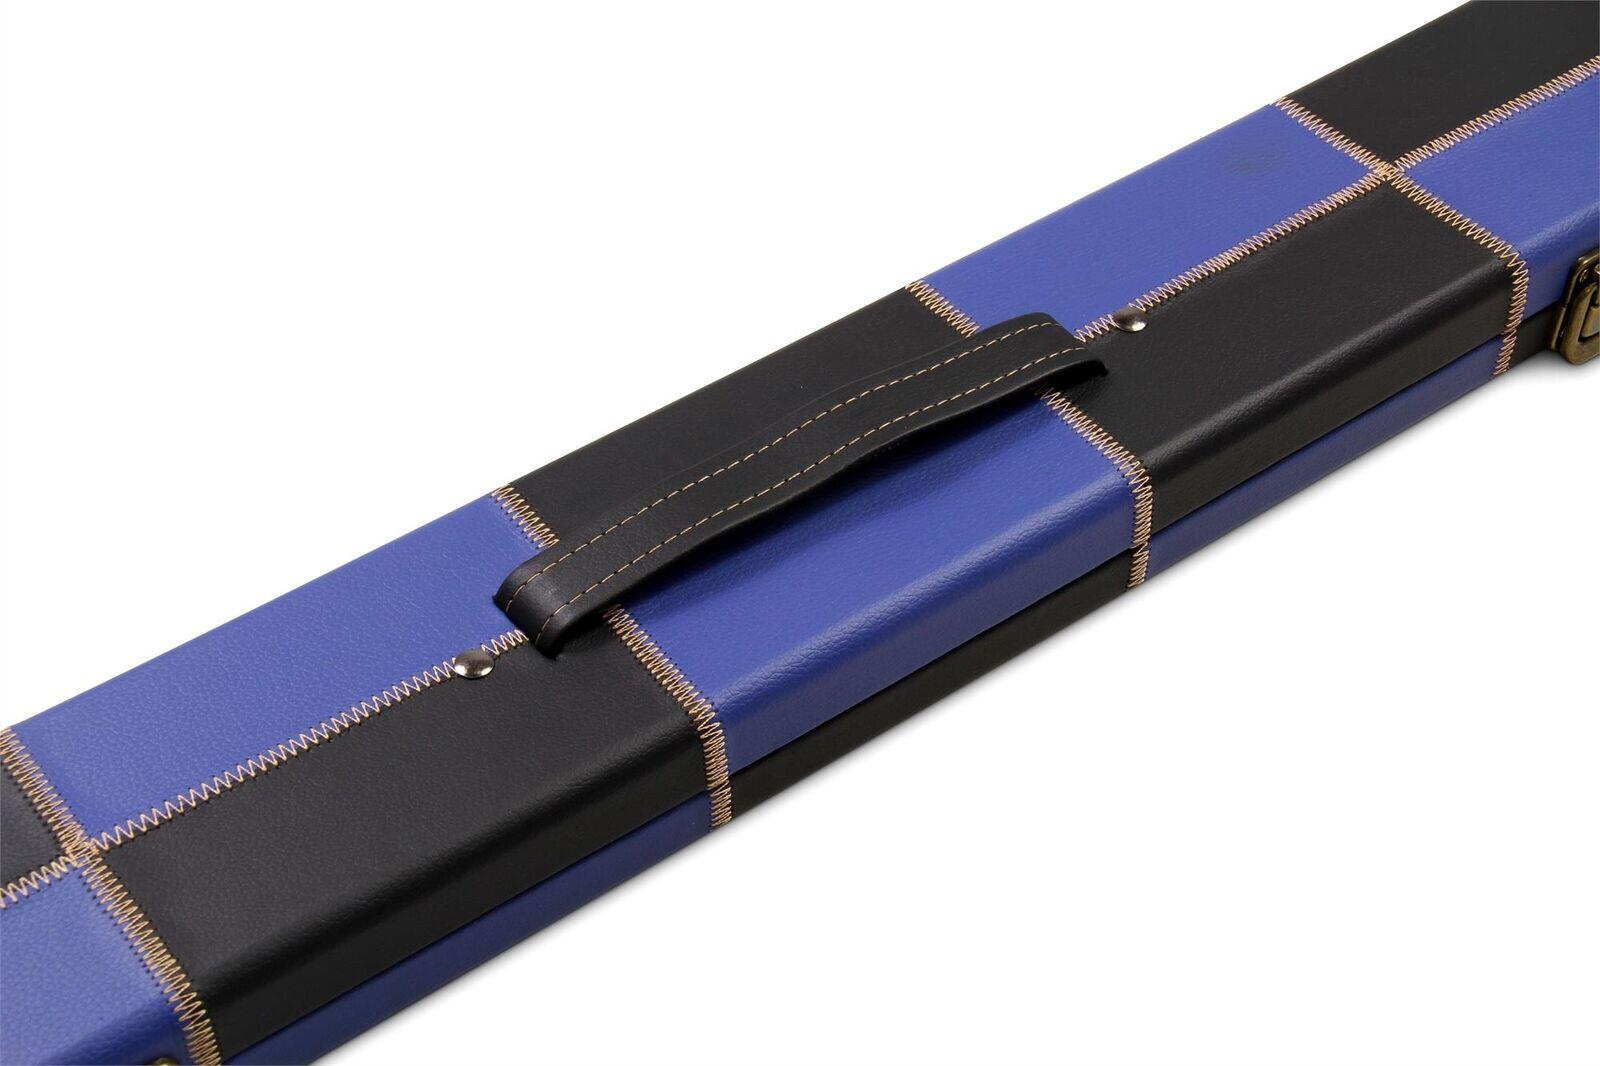 Deluxe 1 Piece WIDE BLUE CHEQUERED Snooker Pool Cue Case - Holds 3 Cues 3/7